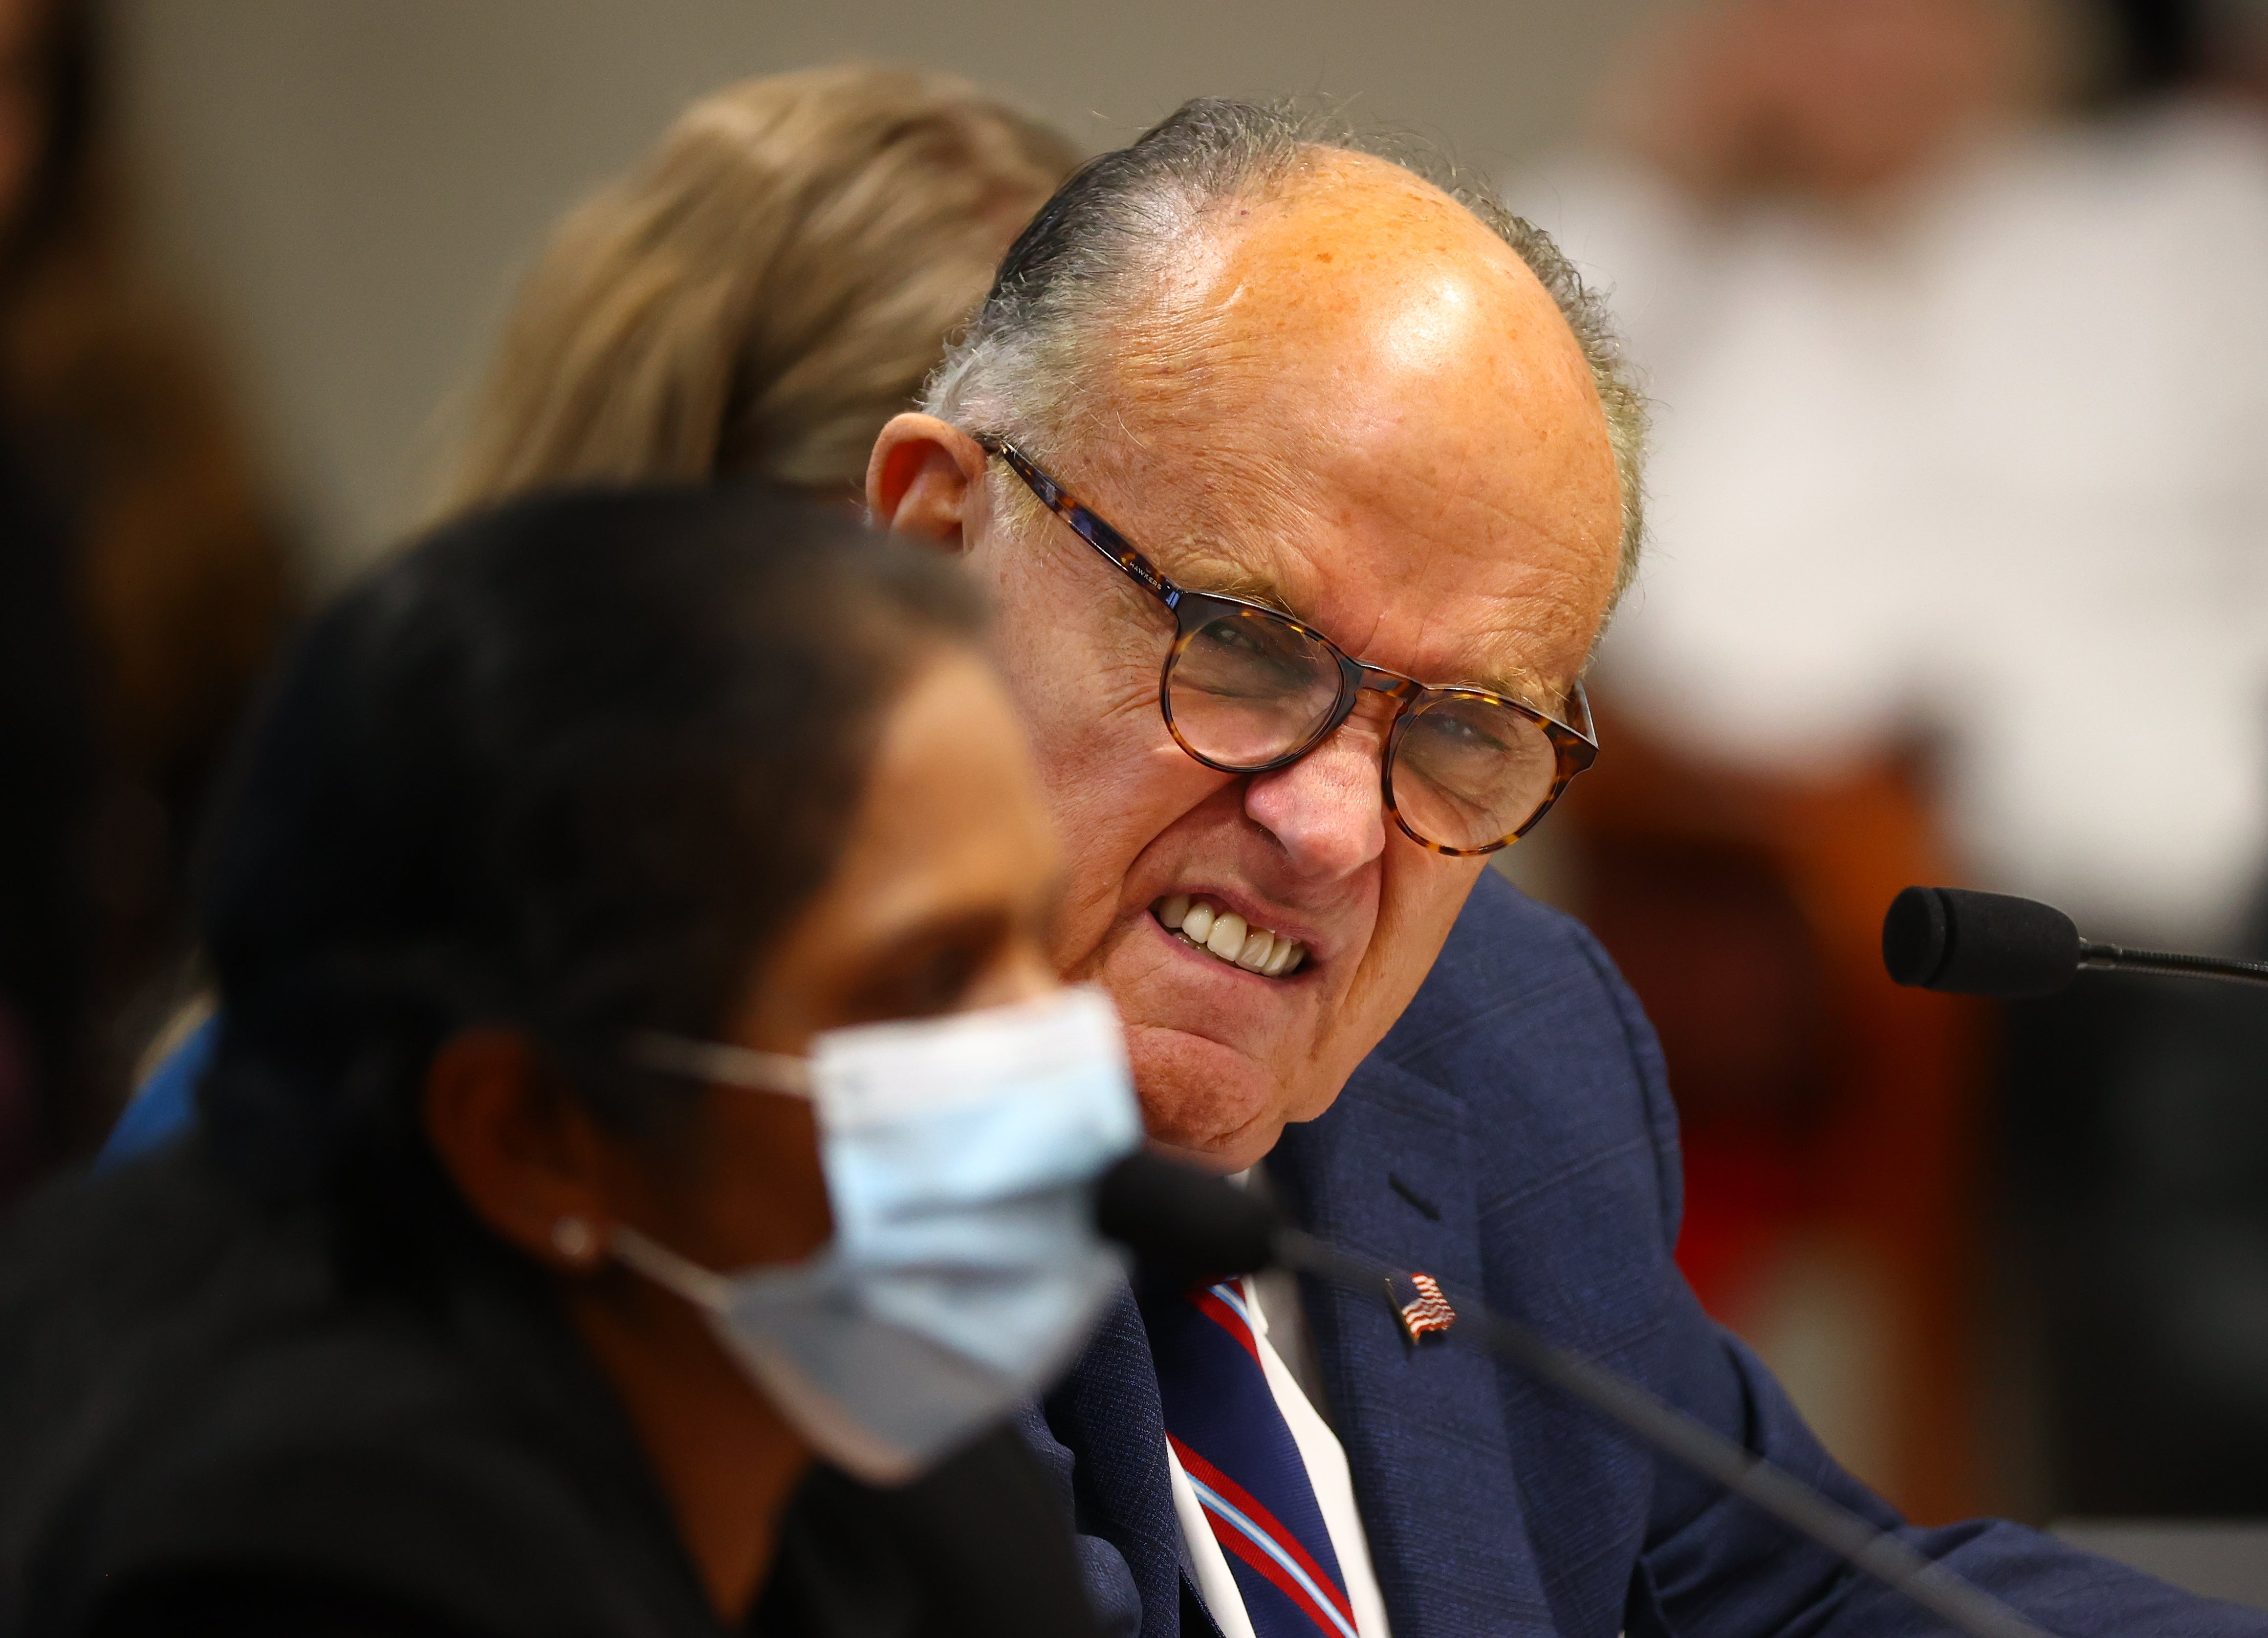 President Donald Trump’s personal attorney Rudy Giuliani has been touring the country in the midst of a global pandemic while promoting misinformation and outright falsities about the election results. He has since tested positive for Covid-19.